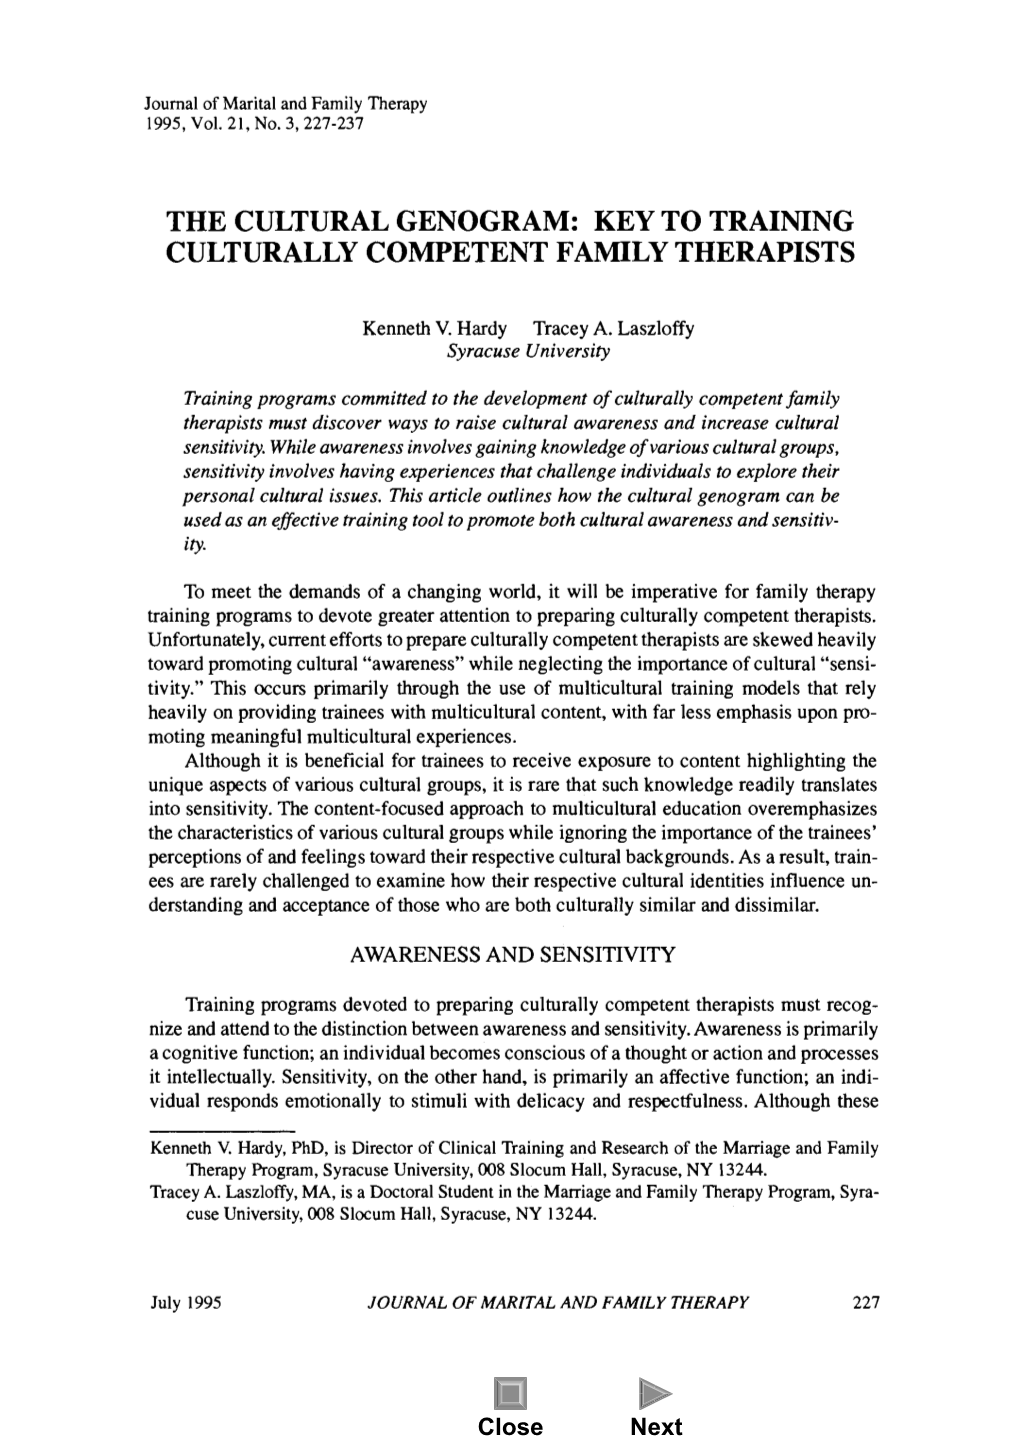 The Cultural Genogram: Key to Training Culturally Competent Family Therapists